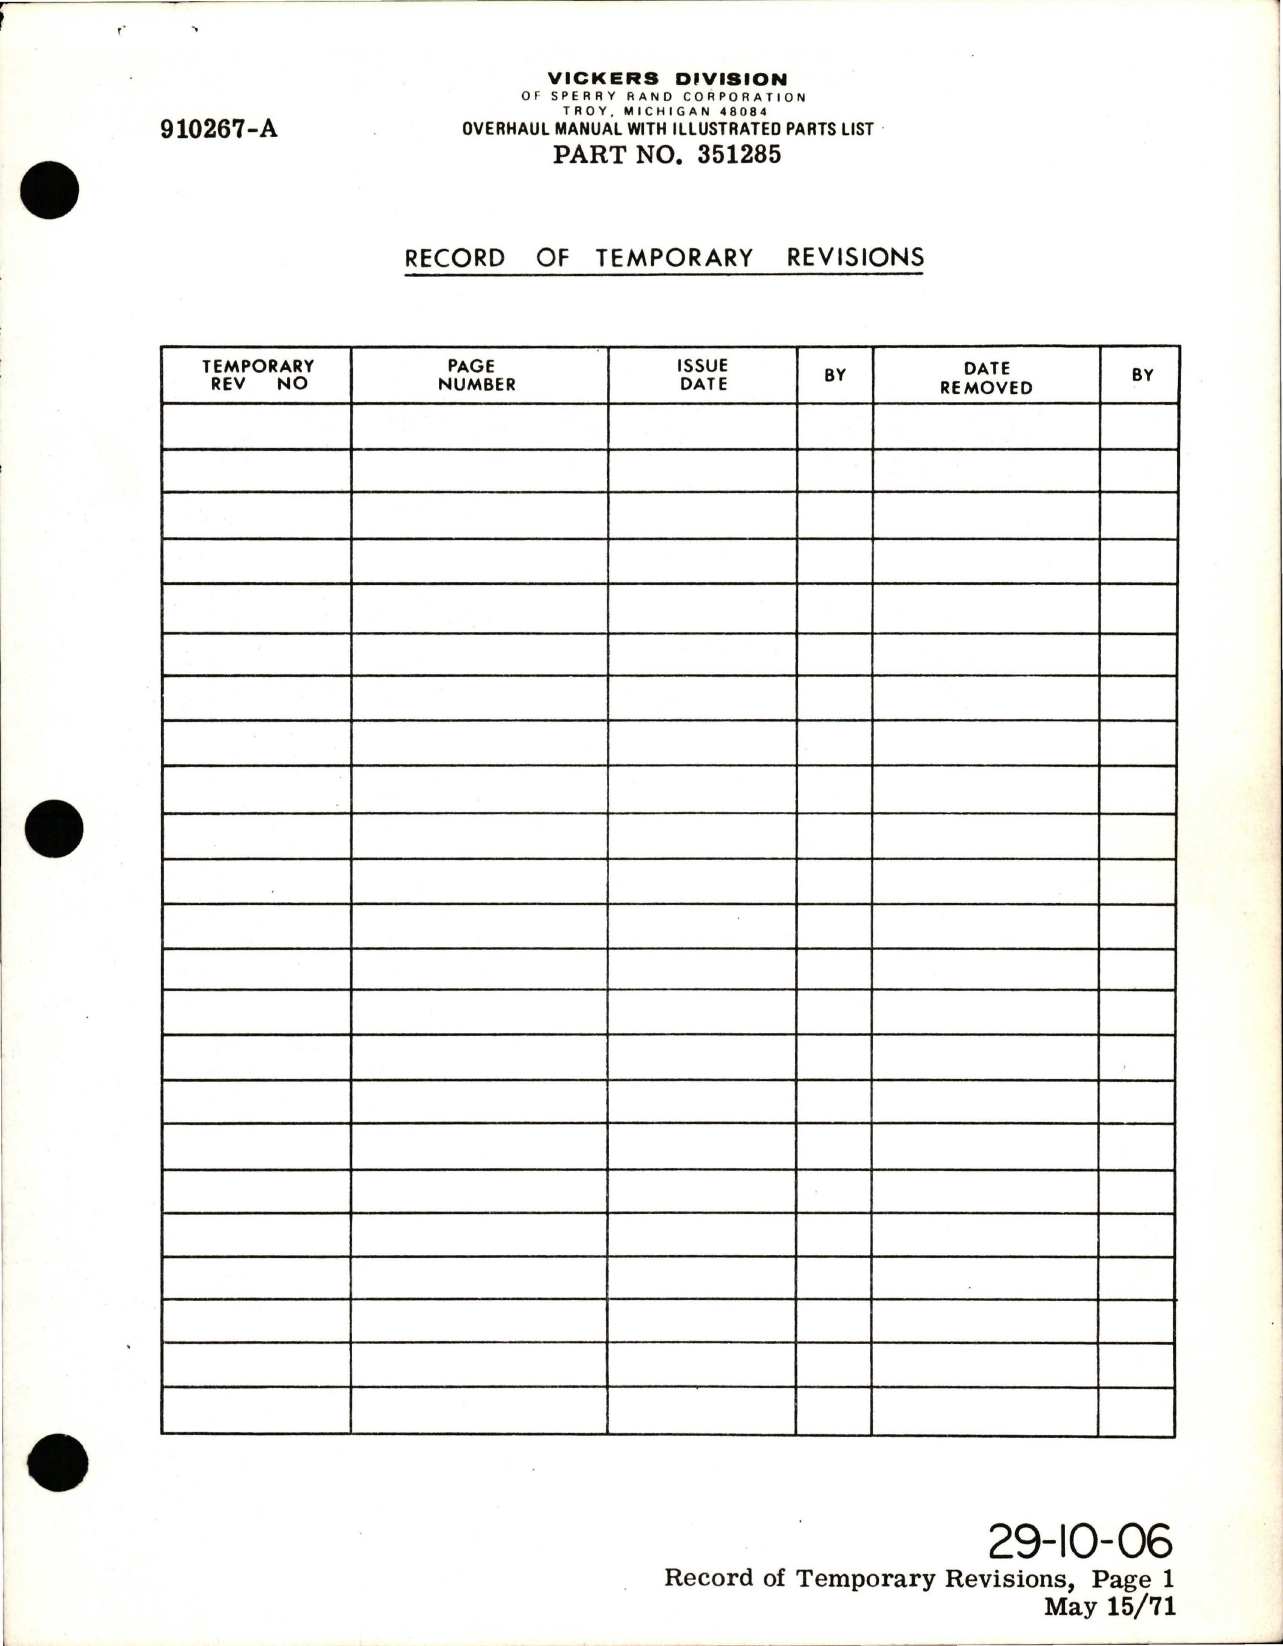 Sample page 5 from AirCorps Library document: Overhaul with Illustrated Parts List for Variable Displacement Hydraulic Pump - Part 351285 - Model PV3-022-8A